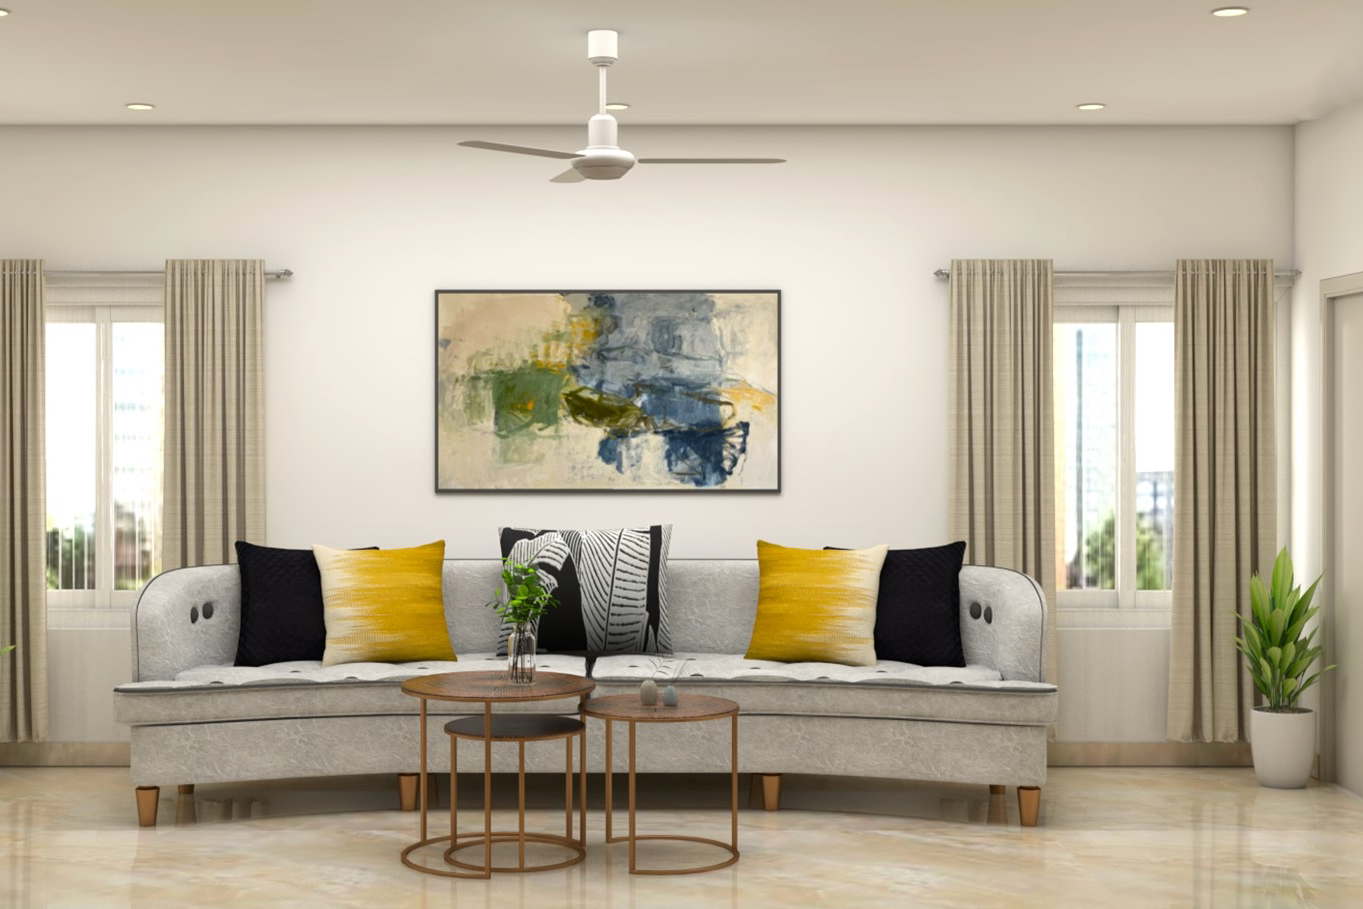 Modern Living Room Design With Grey Sofa And Wall Art